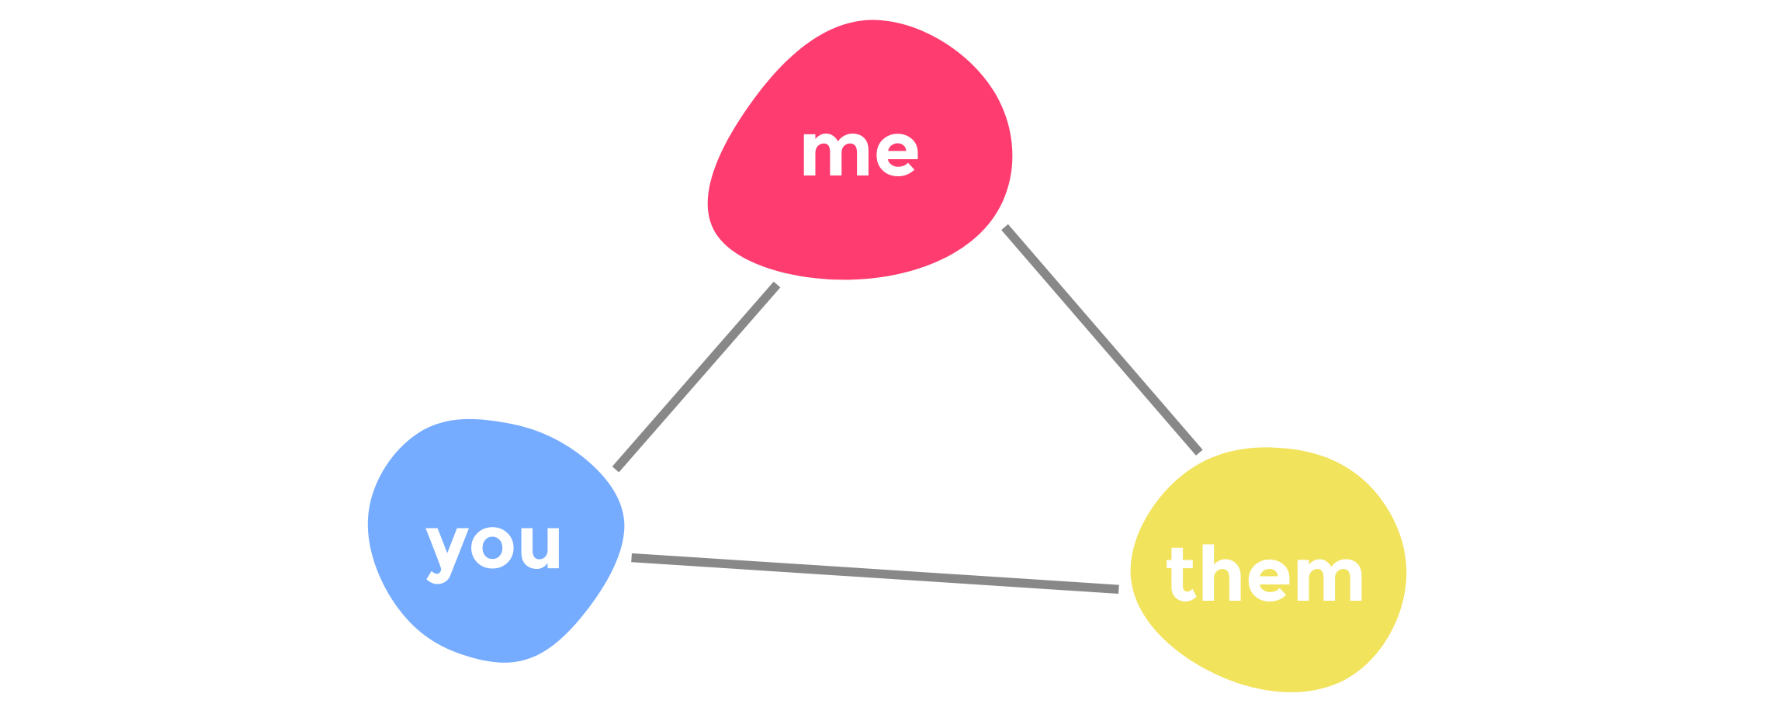 Three blobs (pink, blue, and yellow) with the labels ‘me’, ‘you’, and ‘them’ are all connected to one another with grey lines.